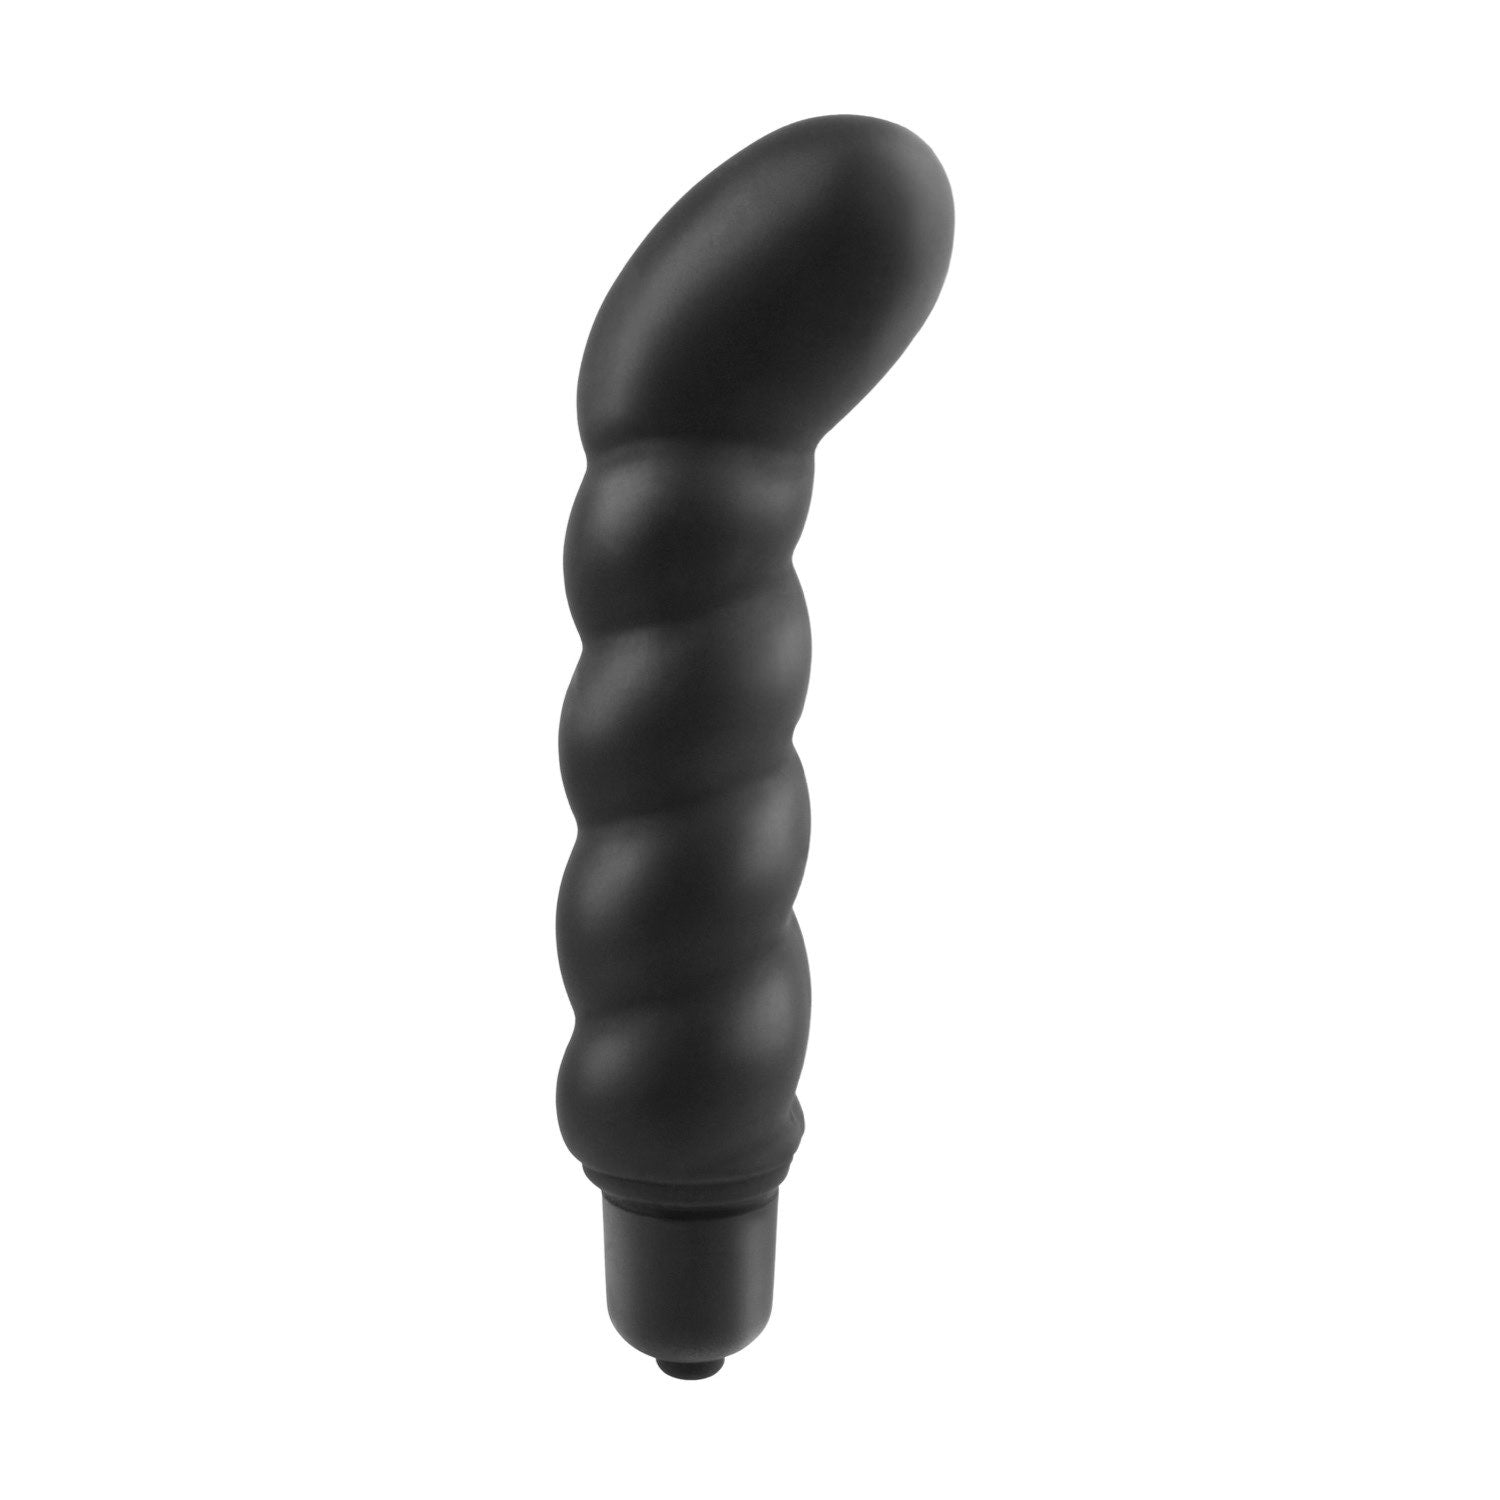 Anal Fantasy Collection Ribbed P-spot Vibe - Black 10 cm (4&quot;) Prostate Vibrator by Pipedream